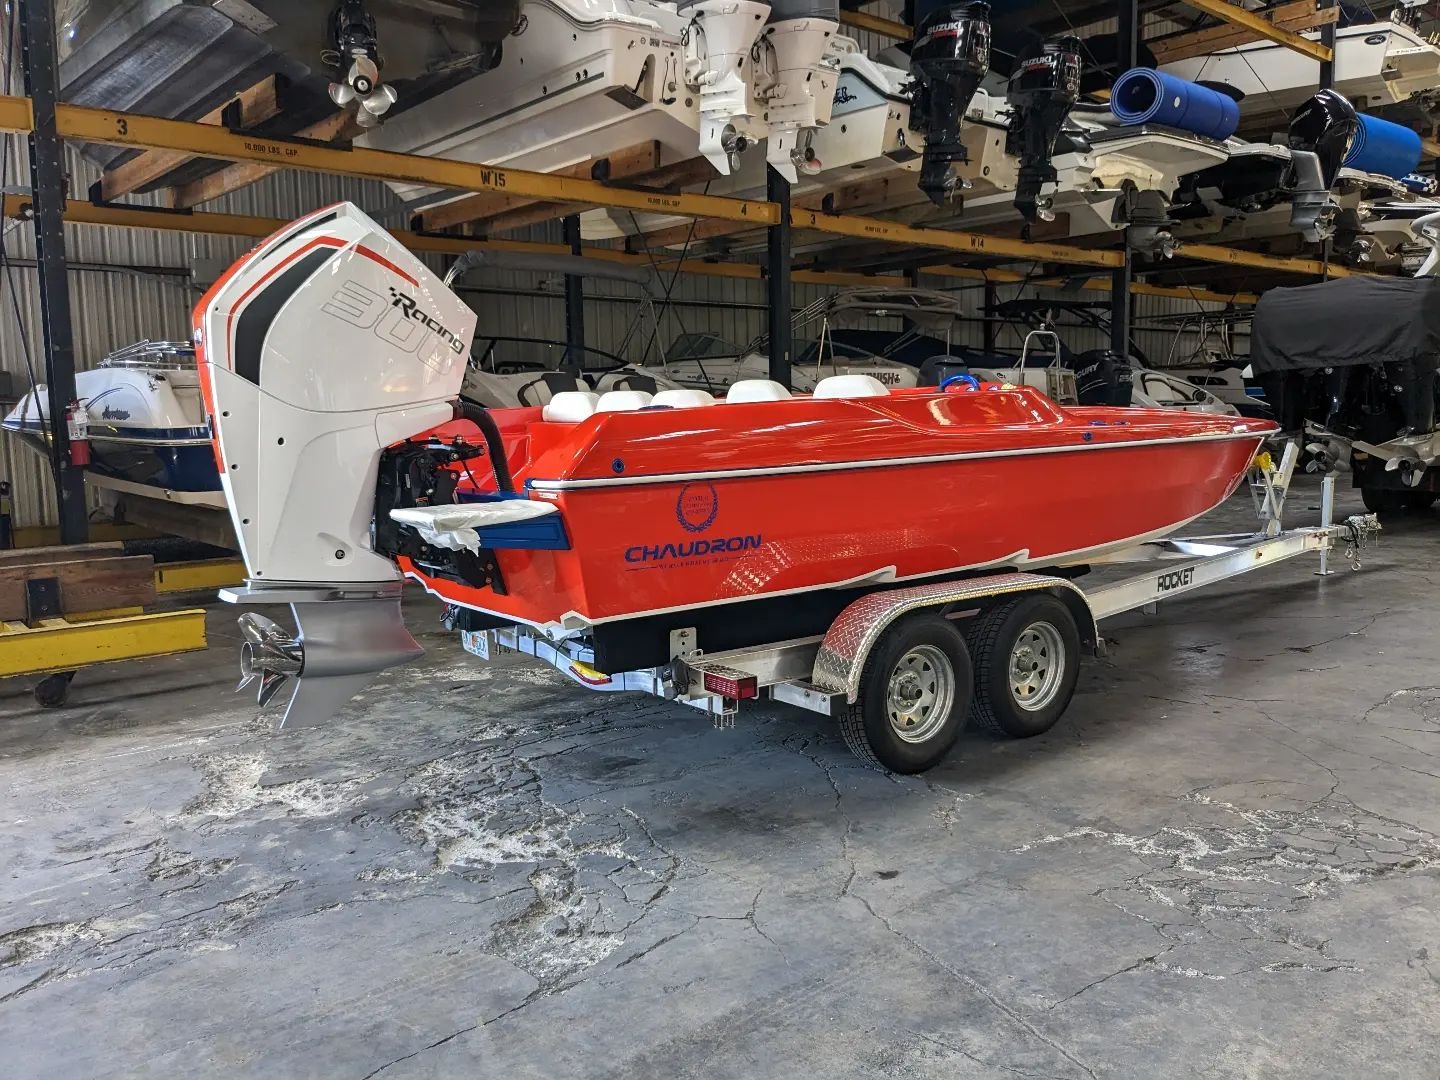 This is a great opportunity, only 25 hours, like new. 300R HD DTS, custom swim steps, Rocket trailer. Vessel view. Livorsi gauges, orange gelcoat. $79,950
With a 32&quot; Bravo FS it will run about 92
Located in Tennessee 
Email sales at norwestermar